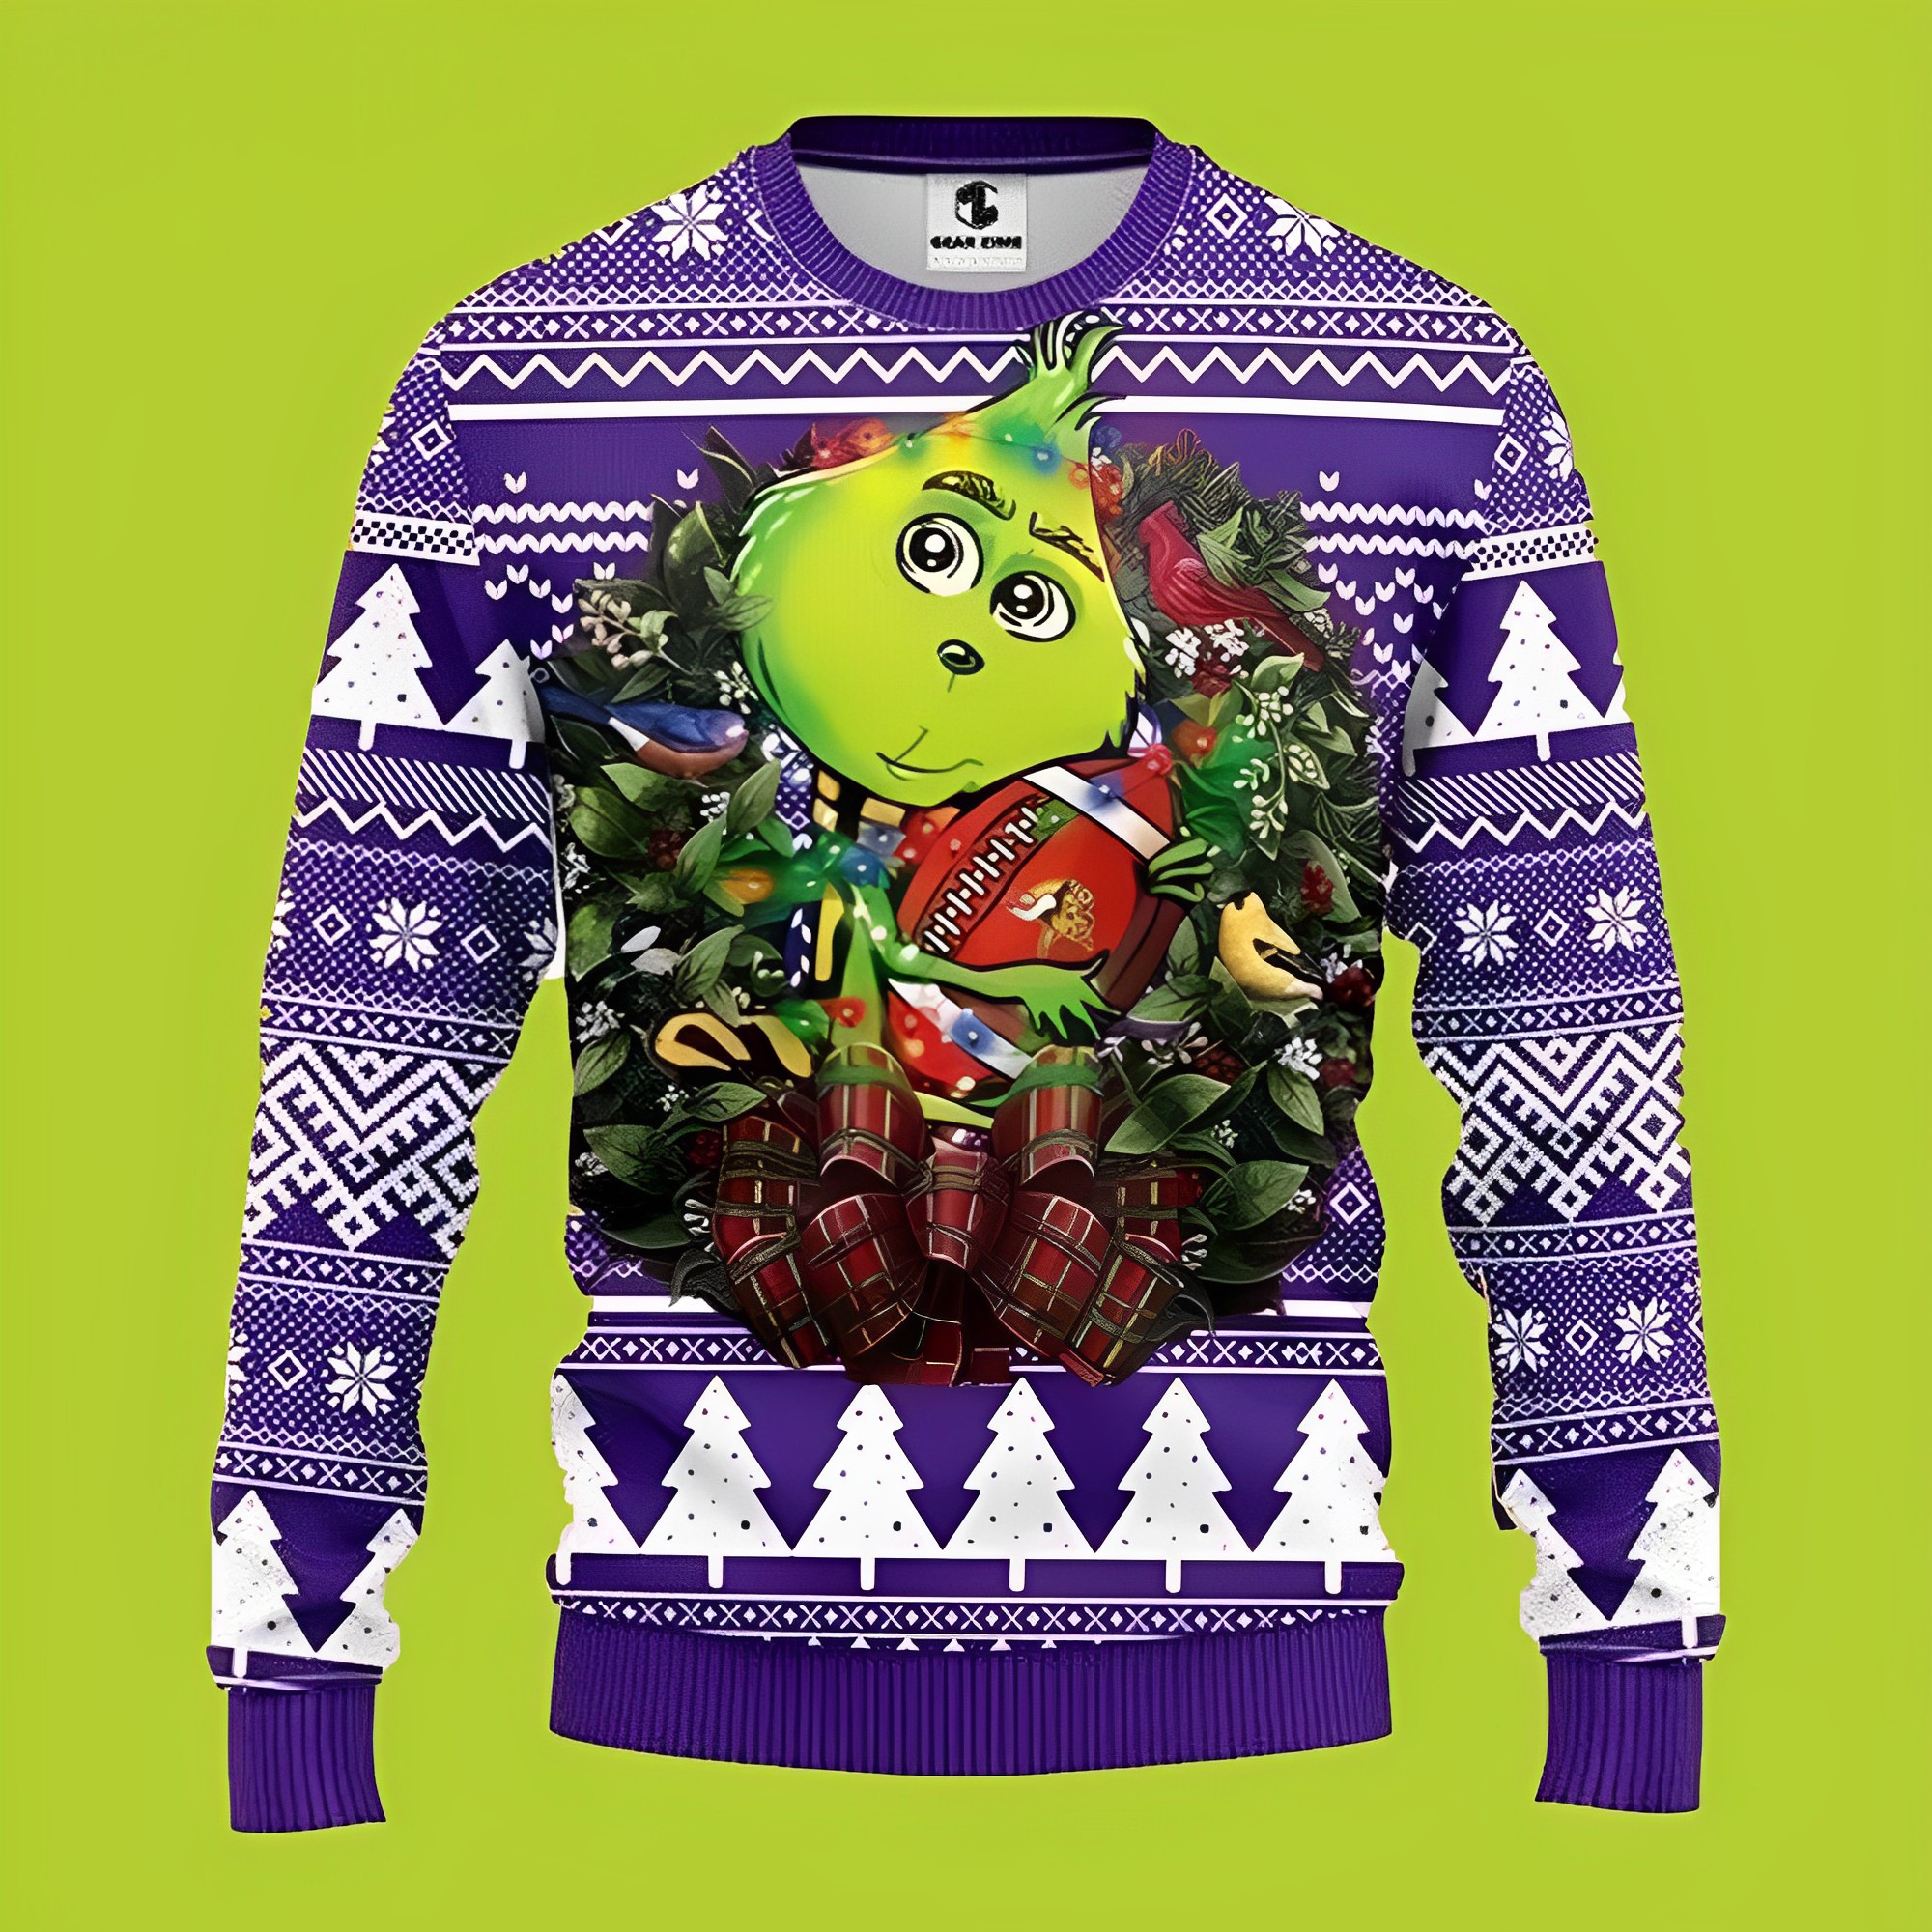 NFL Vikings Football Team Grinch Hug Funny Xmas Sweaters, Grinch Ugly Sweater